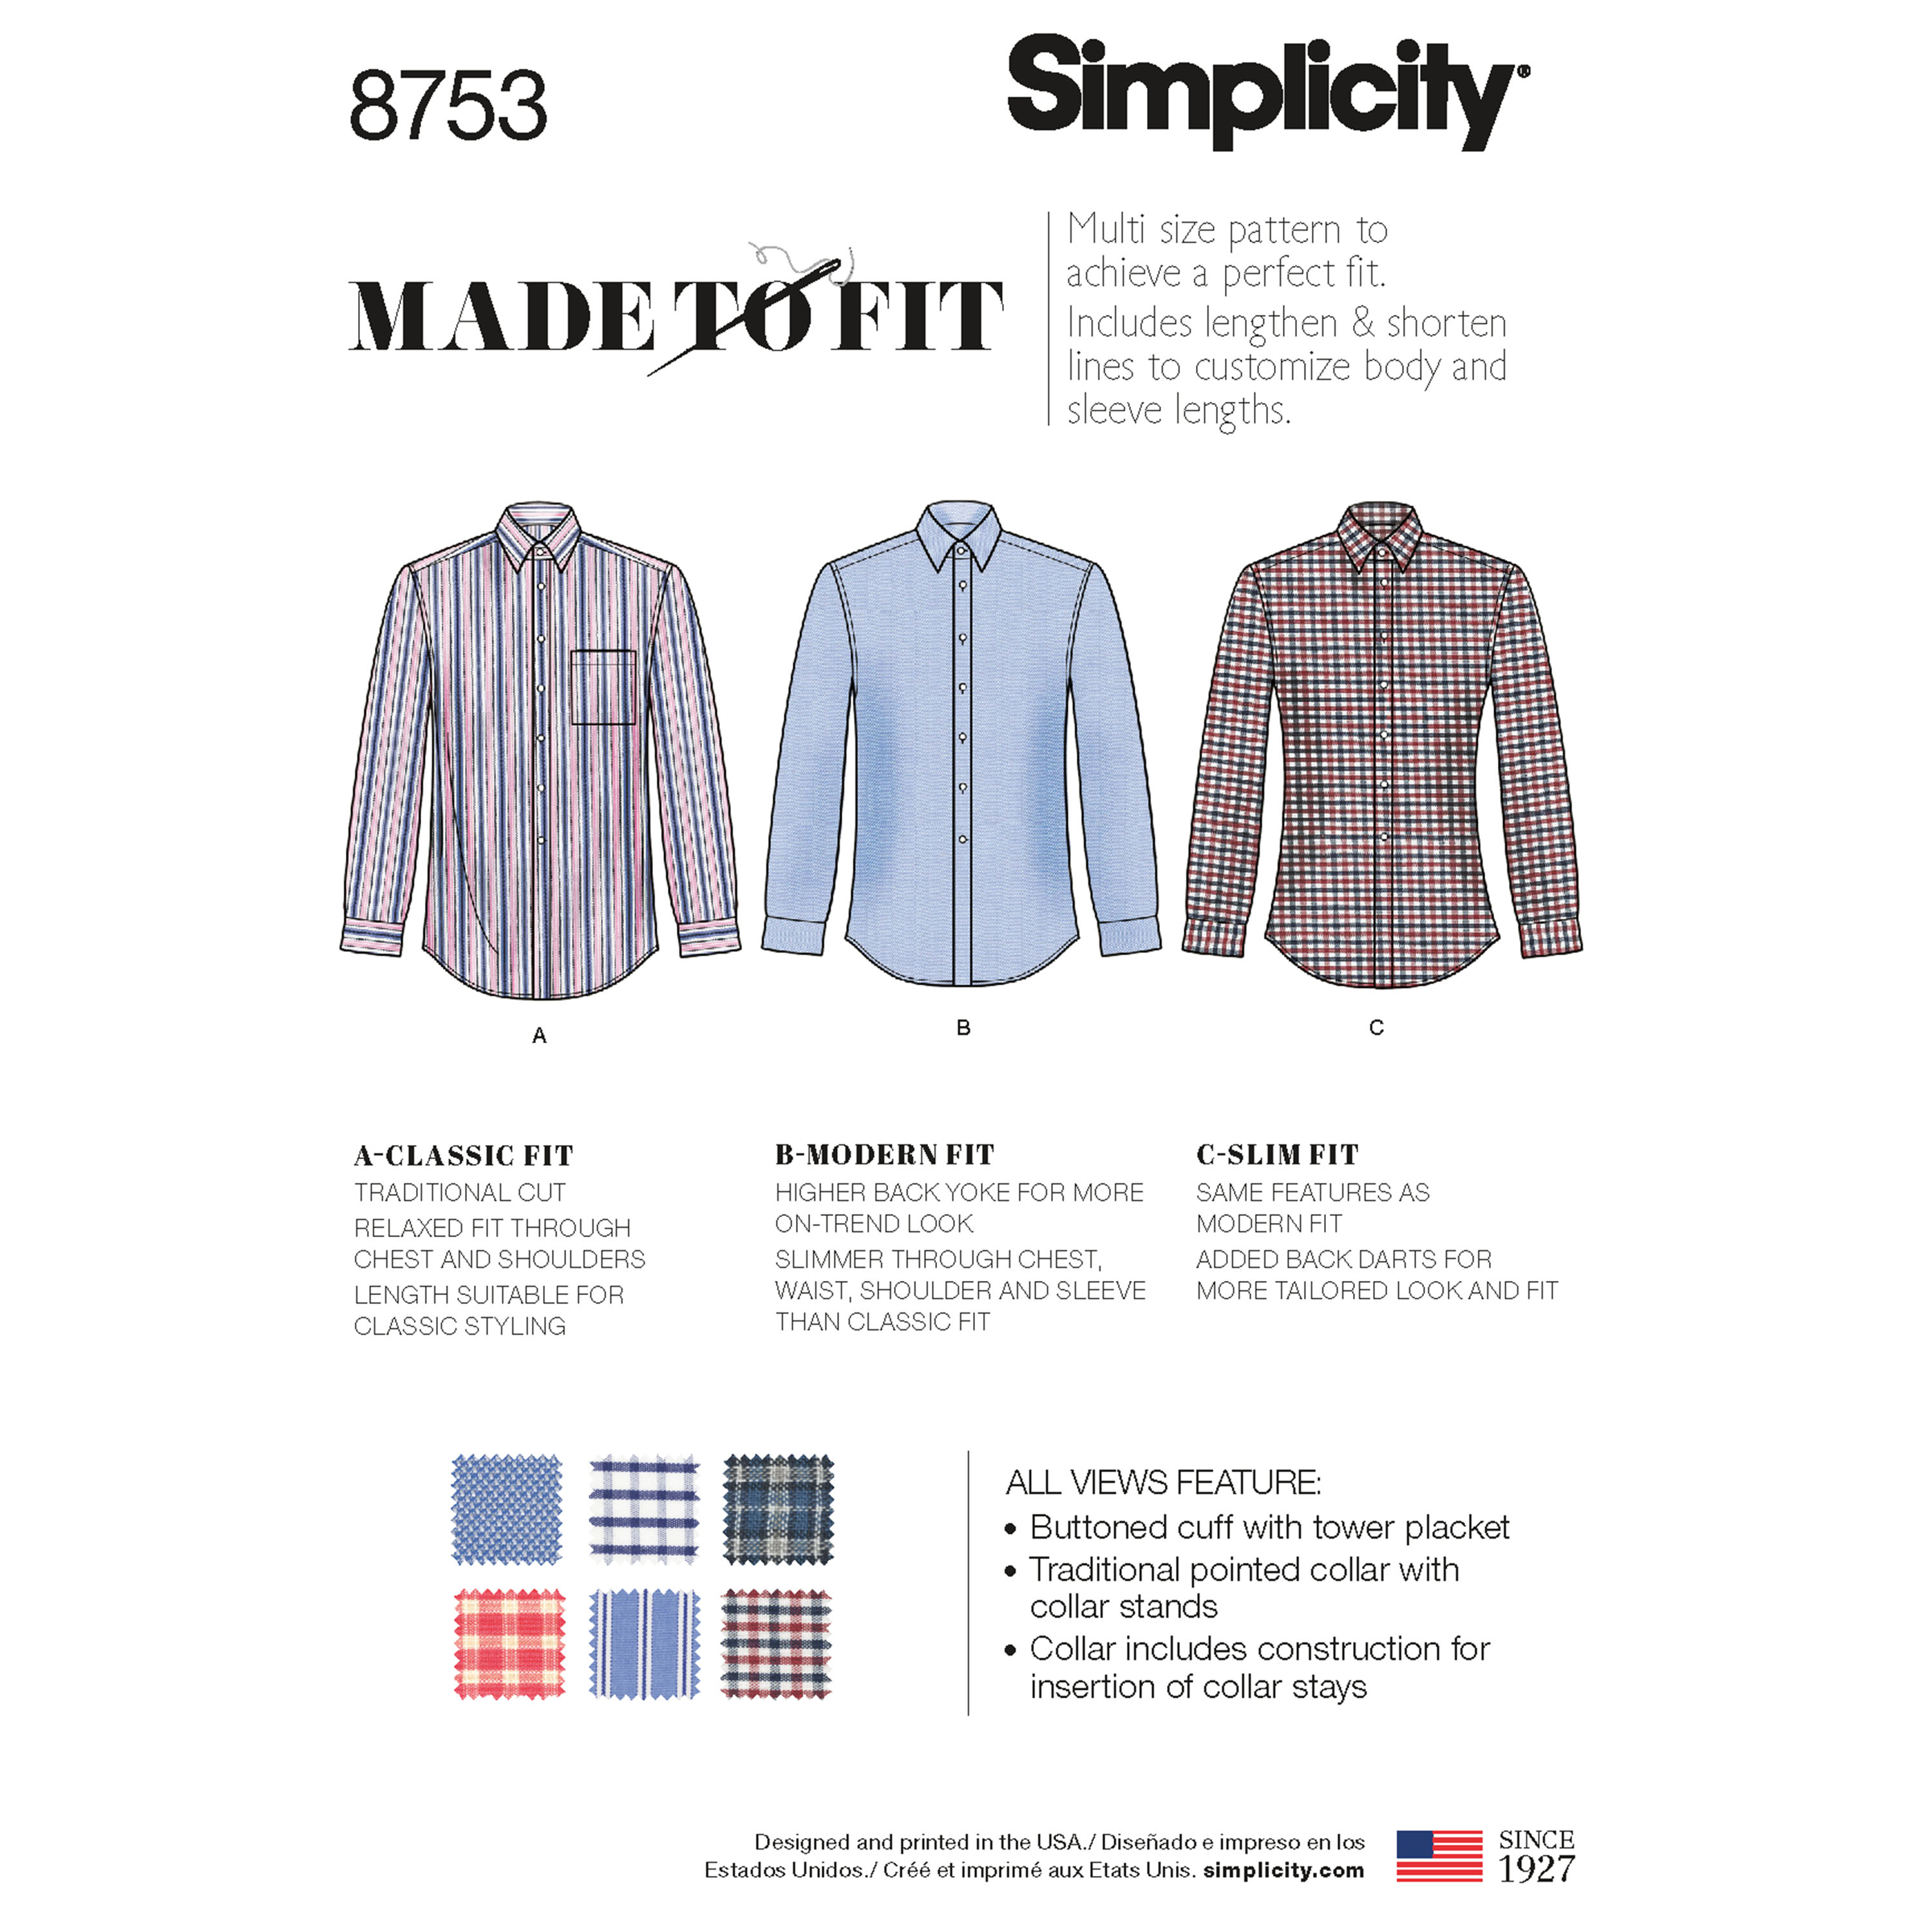 Simplicity 8753 Men's Classic, Modern and Slim-Fit Shirt